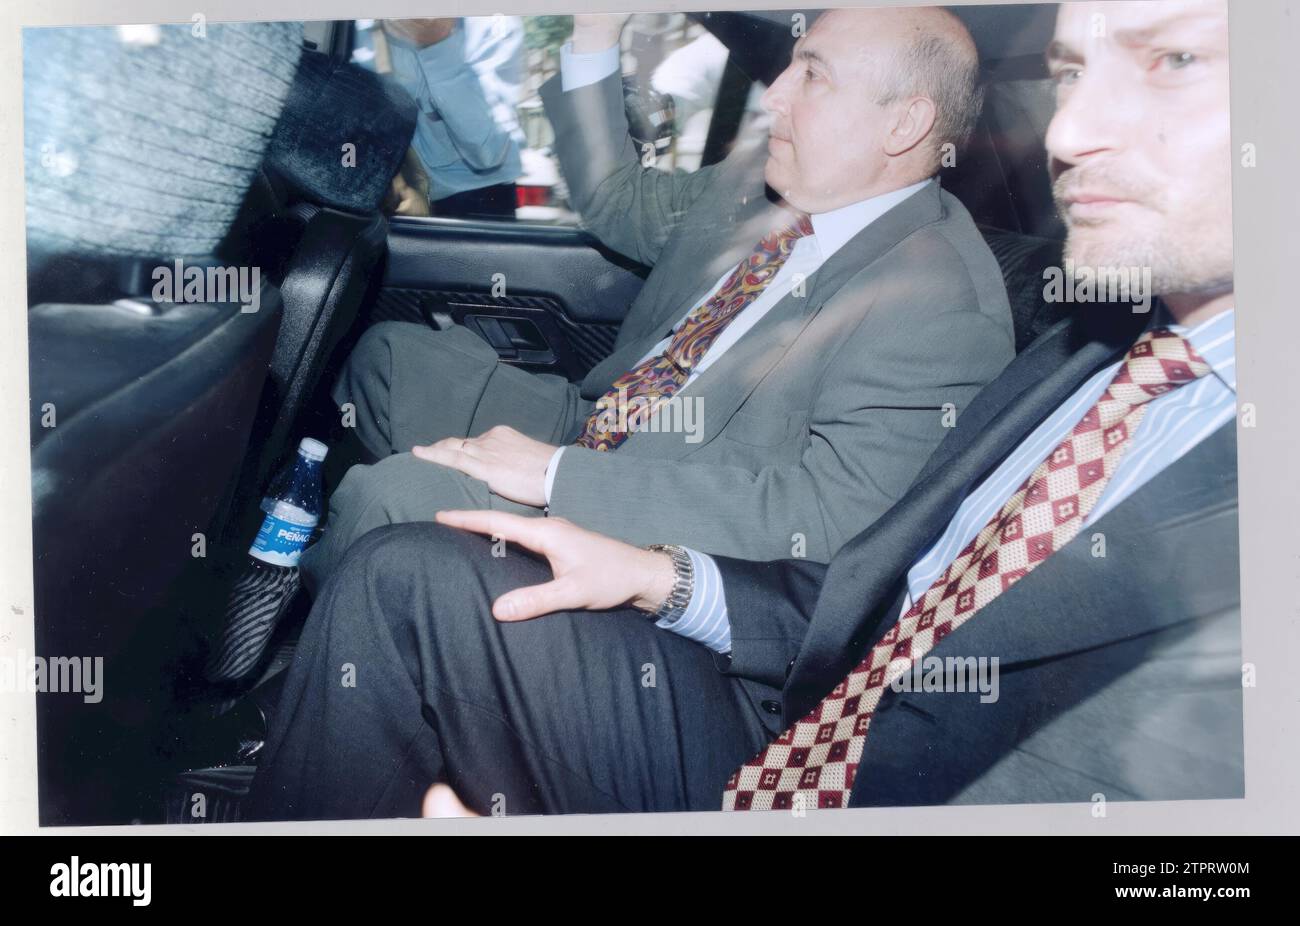 06/10/1998. Roldán inside the car that took him to prison after giving a statement in the trial for the kidnapping of Segundo Marey. Credit: Album / Archivo ABC / Ramón Prieto Stock Photo